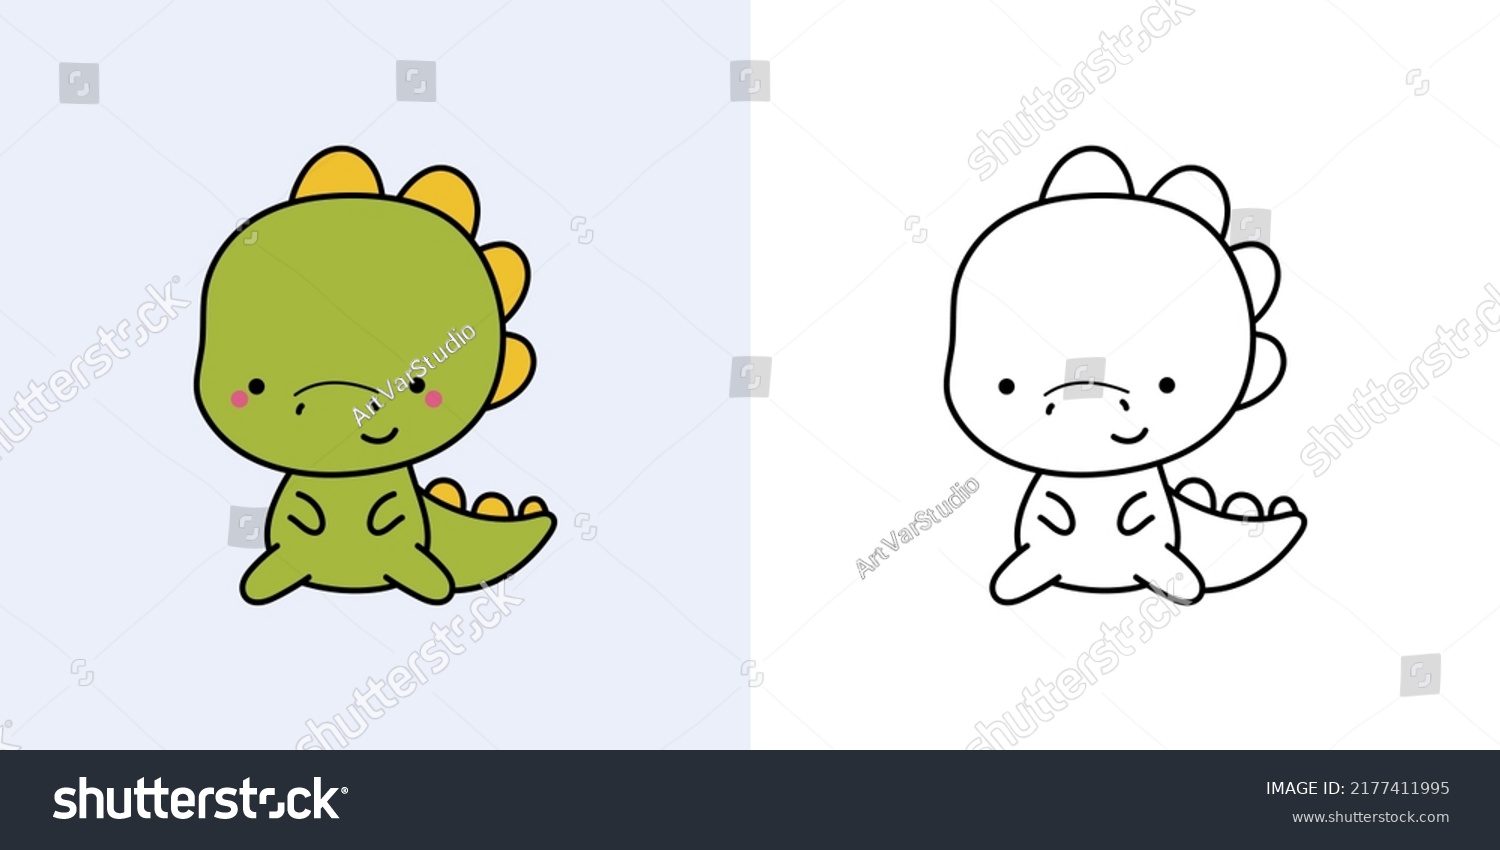 SVG of Kawaii Dinosaur Clipart Multicolored and Black and White. Cute Kawaii Dino. Vector Illustration of a Kawaii Animal for Stickers, Prints for Clothes, Baby Shower, Coloring Page svg